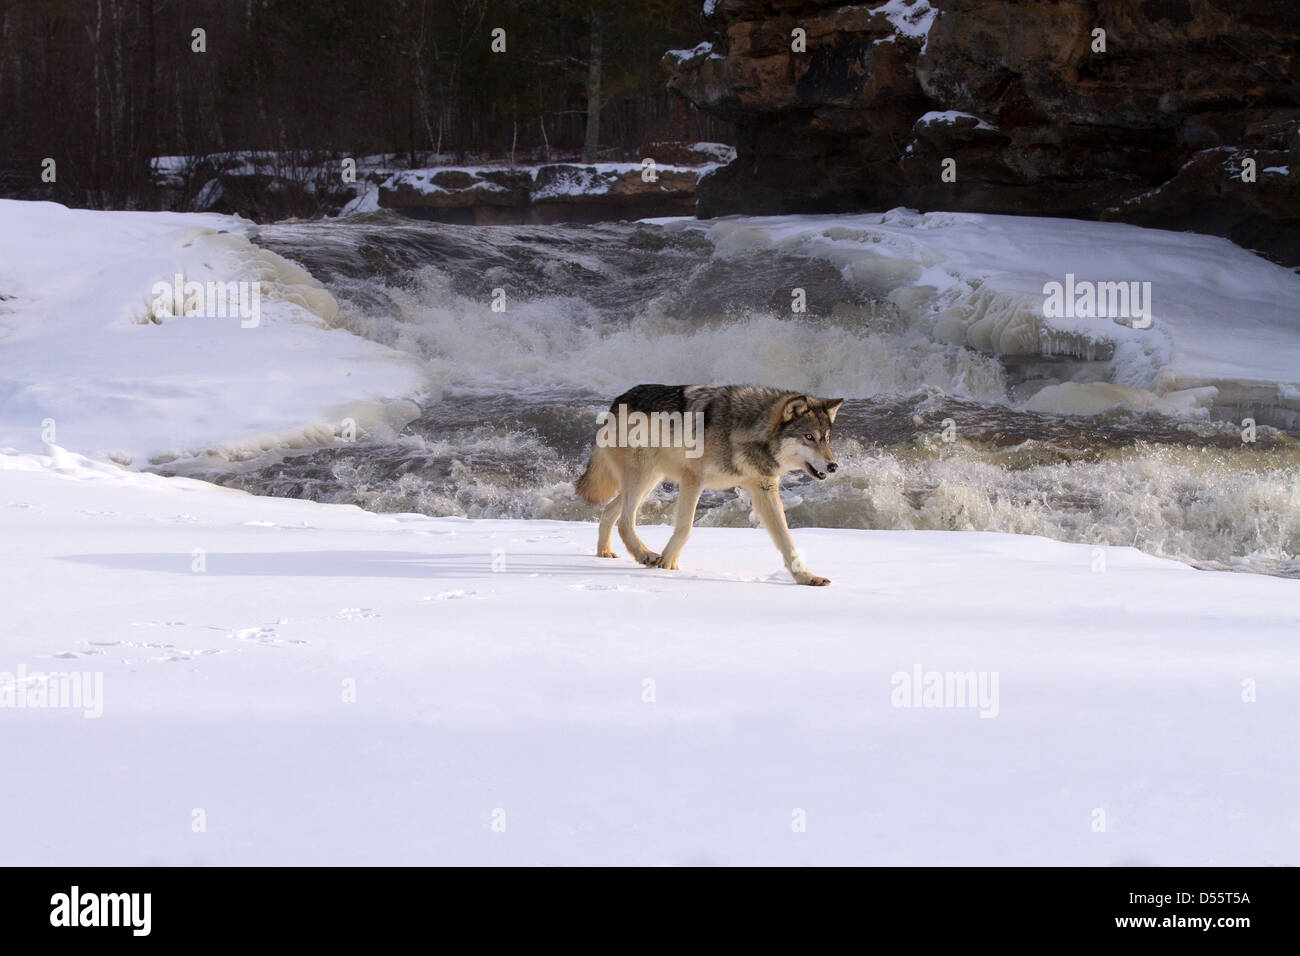 Gray Wolf, Canis lupus walking away from the rapids Stock Photo